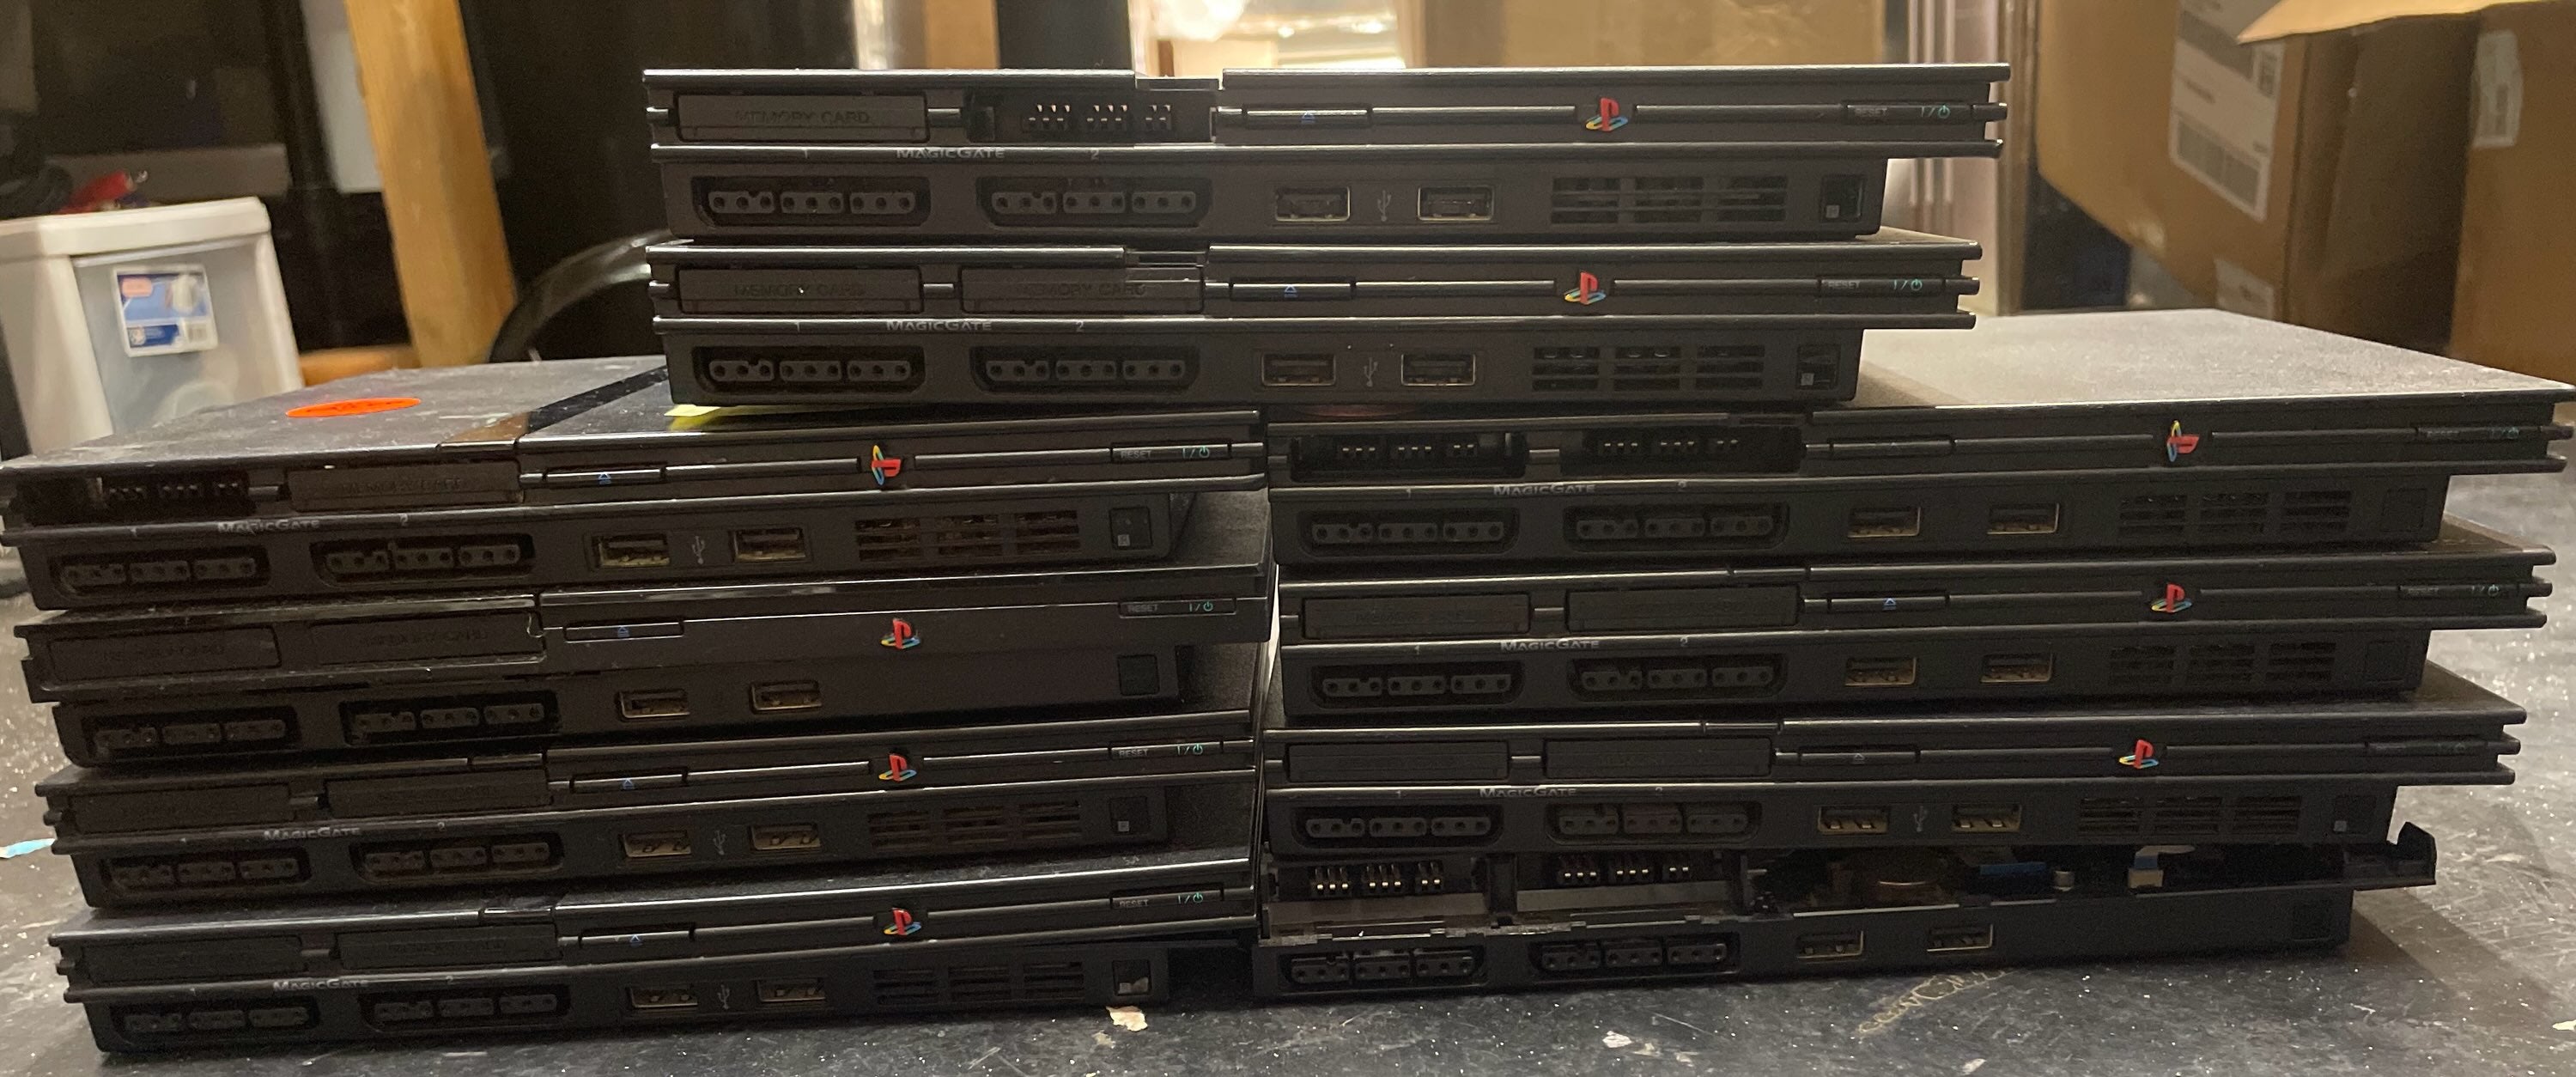 Lot of 10 Sony PlayStation 2 PS2 Slim Consoles for Parts or Repair